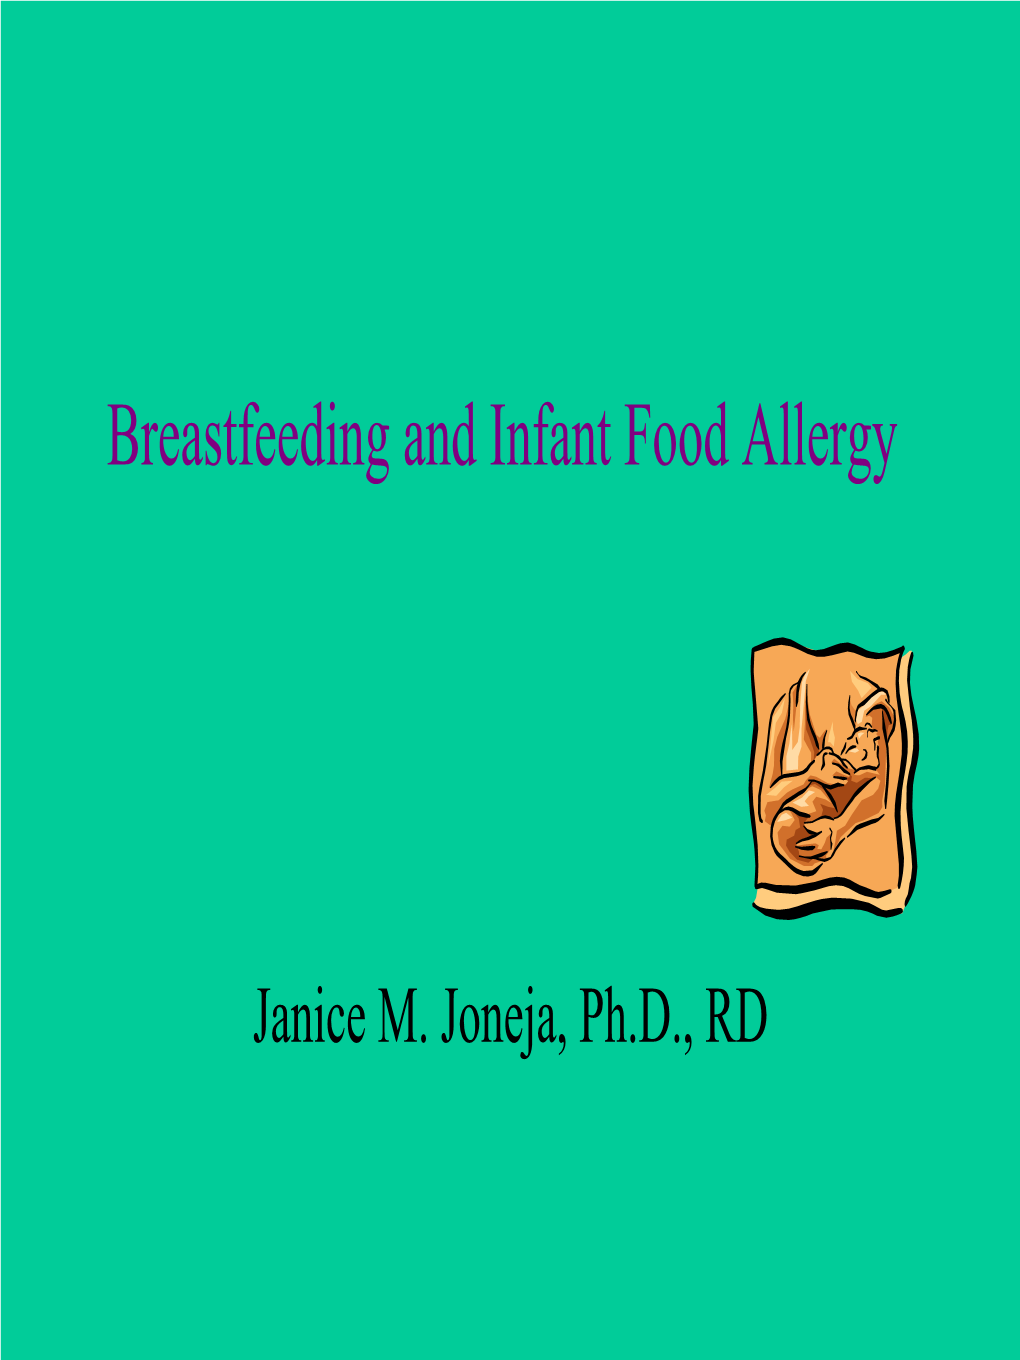 Part 3 Breastfeeding and Infant Food Allergy